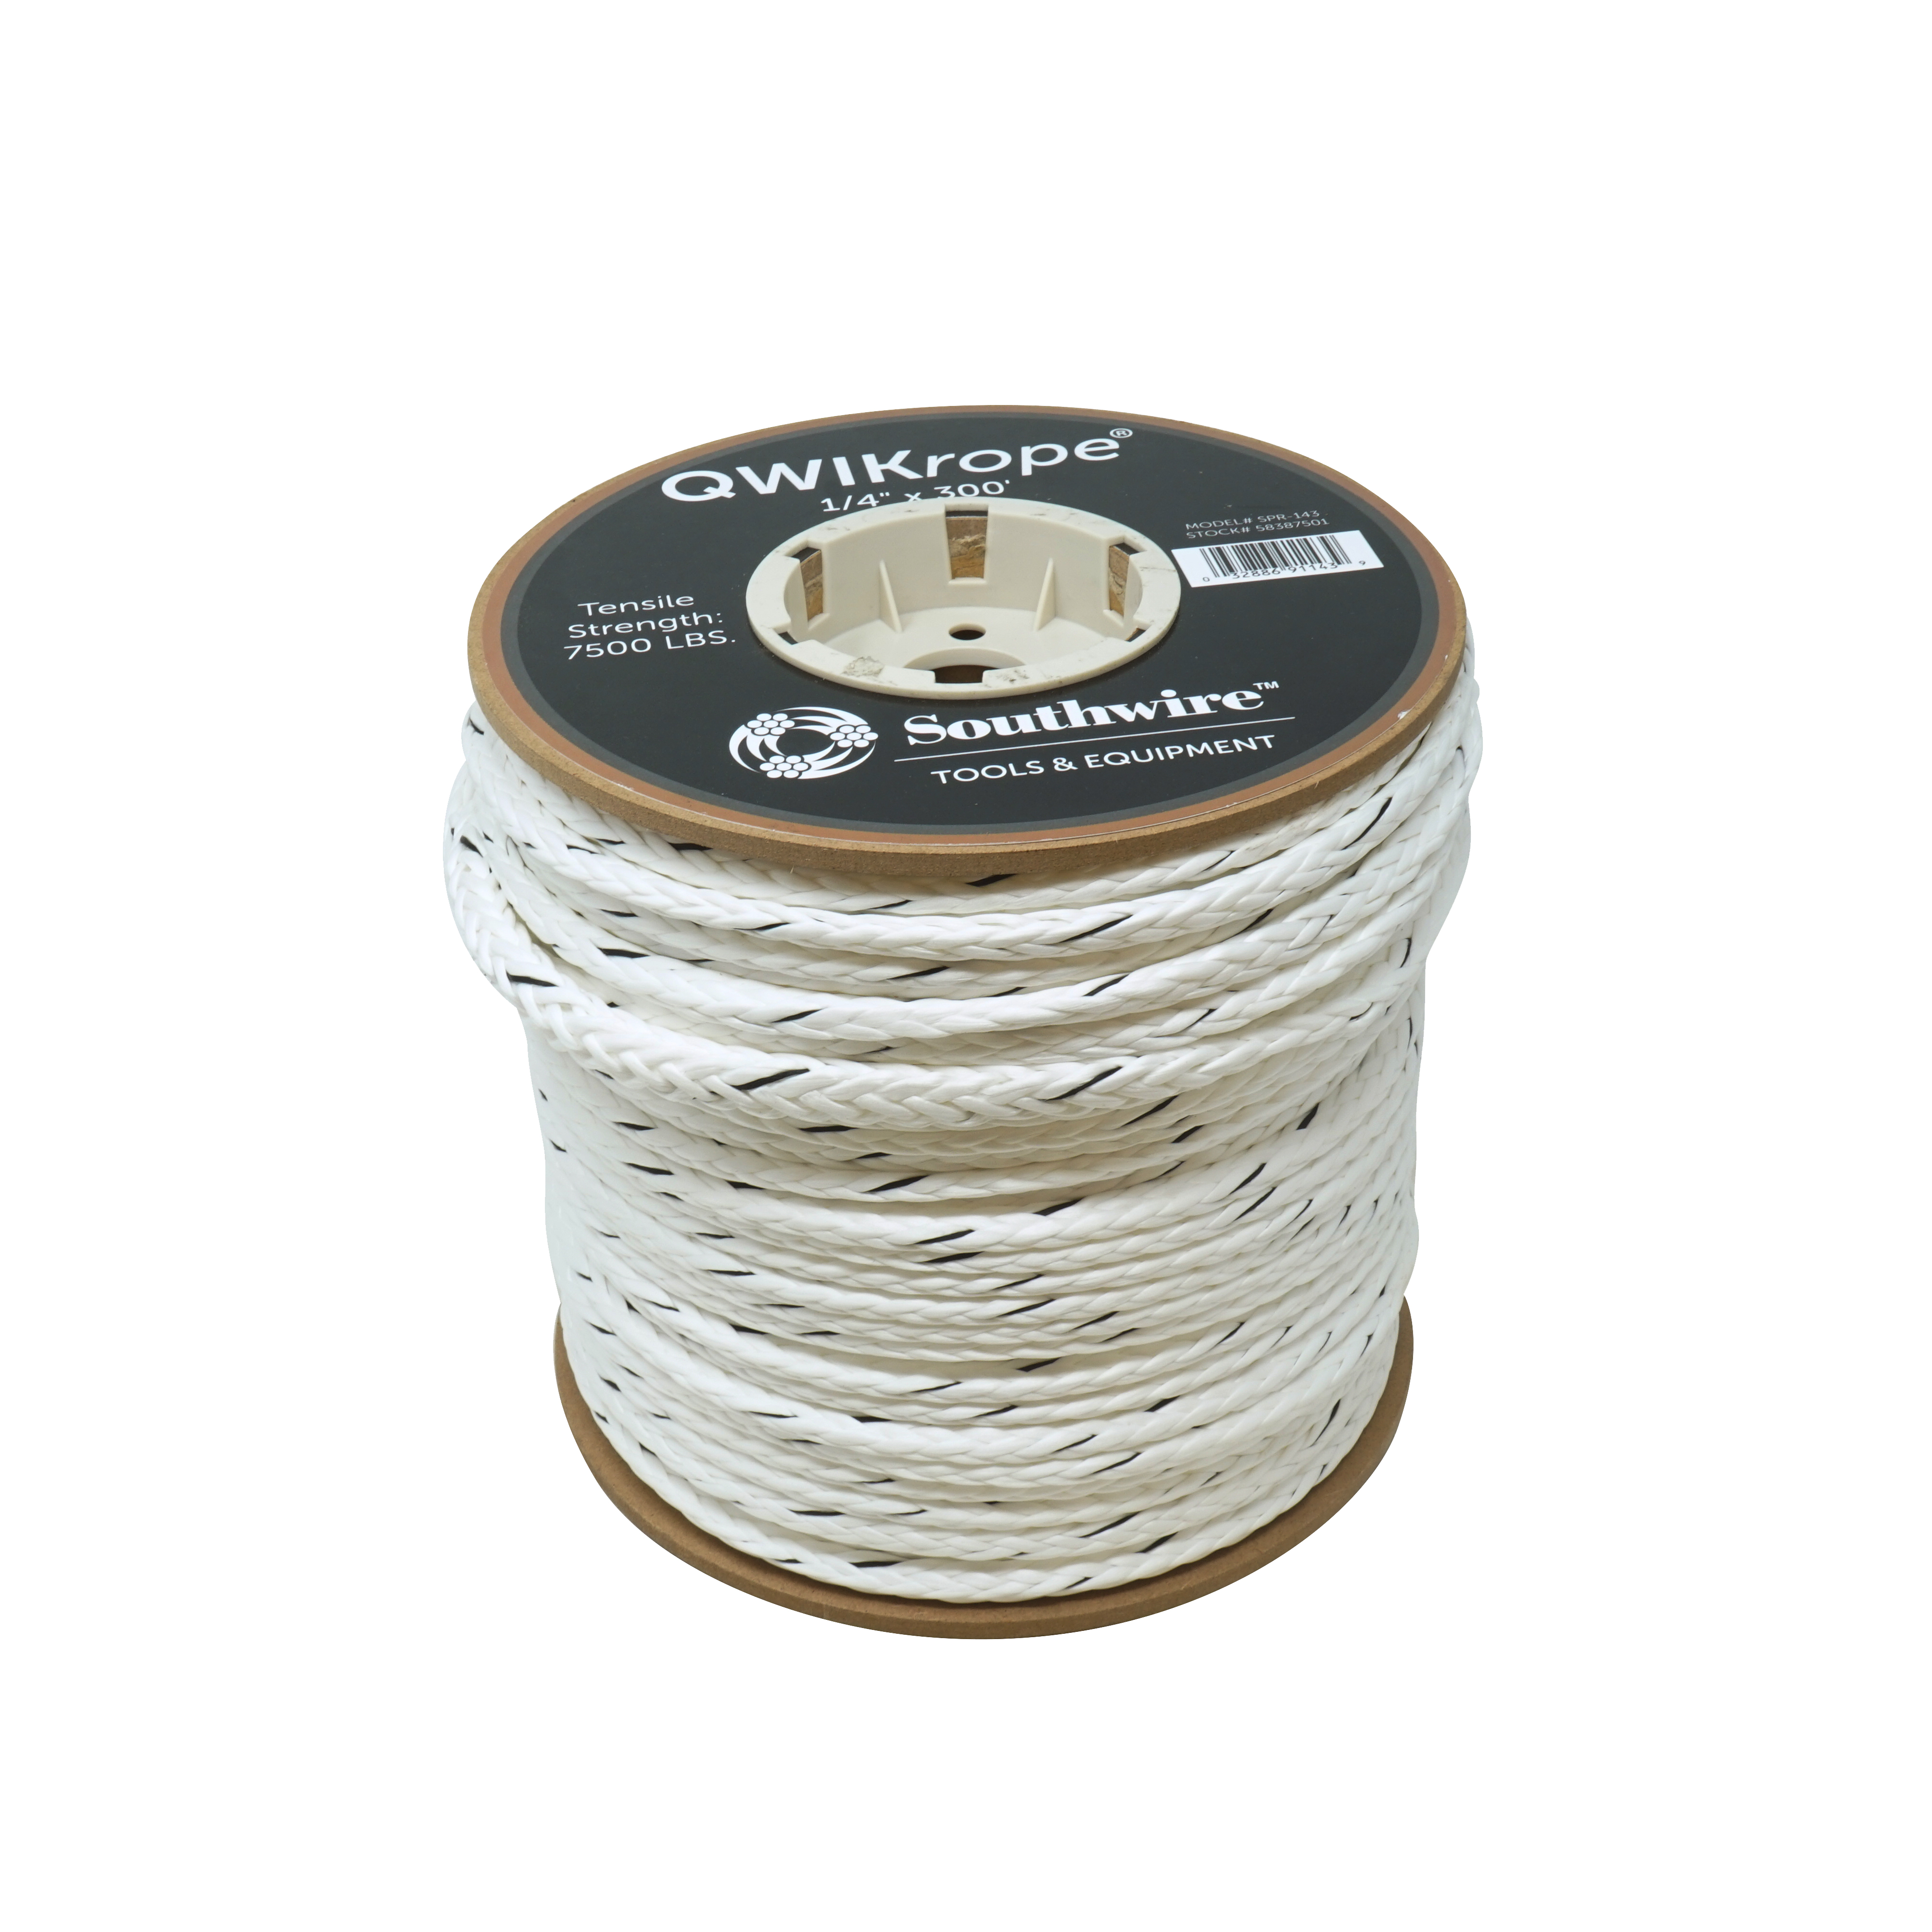 Southwire QWIKrope 